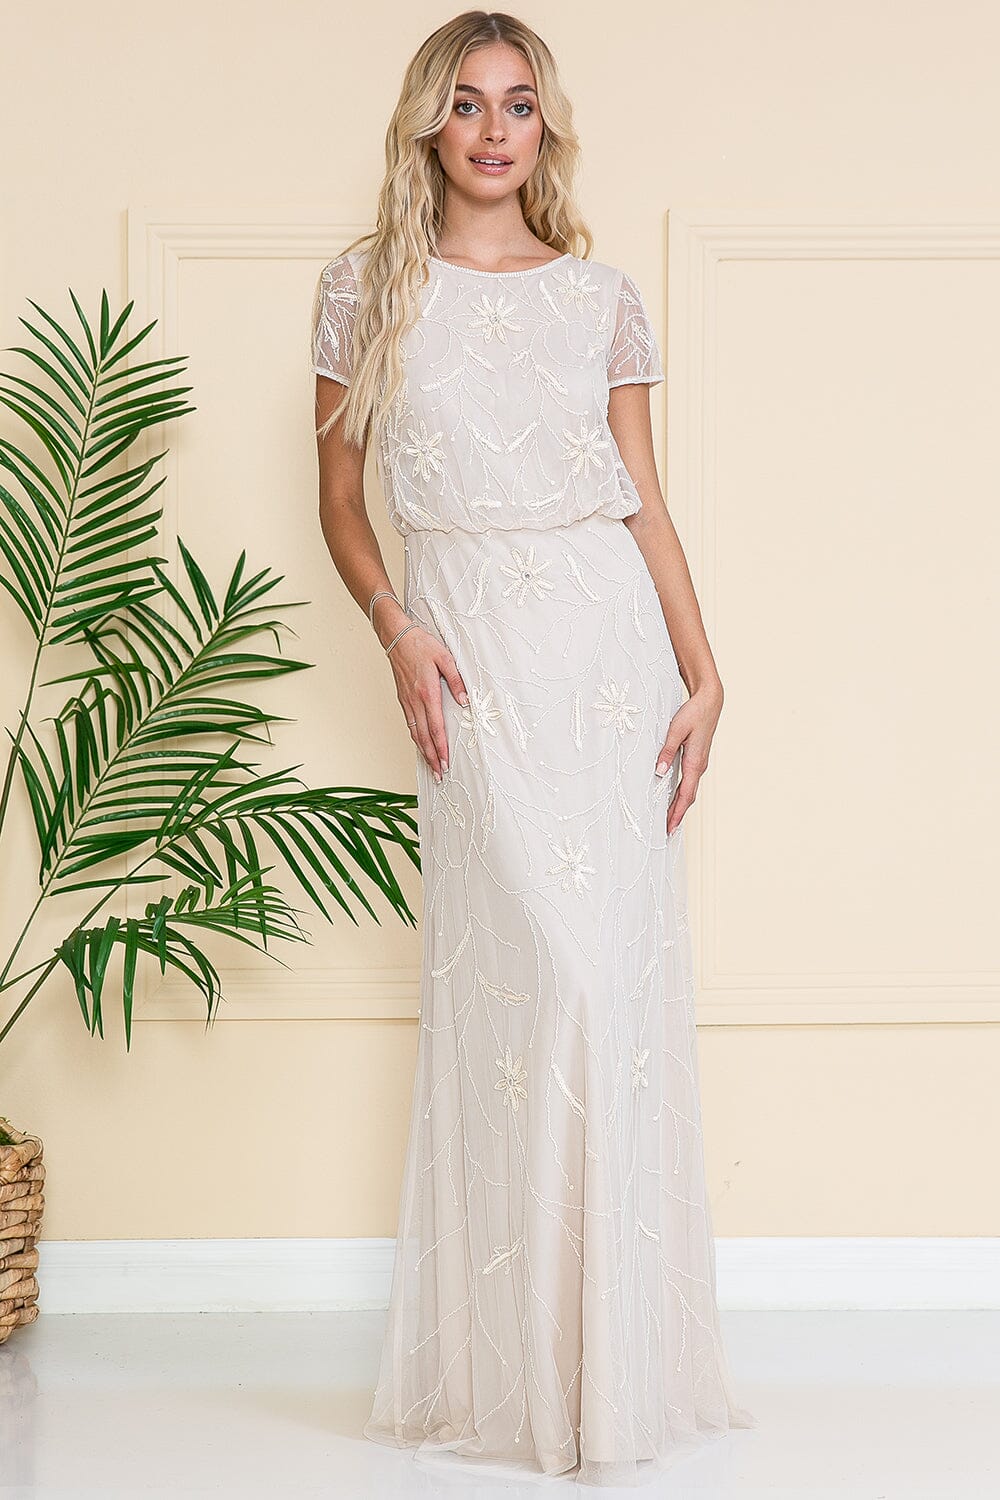 Embellished Short Sleeve Gown by Amelia Couture IN004